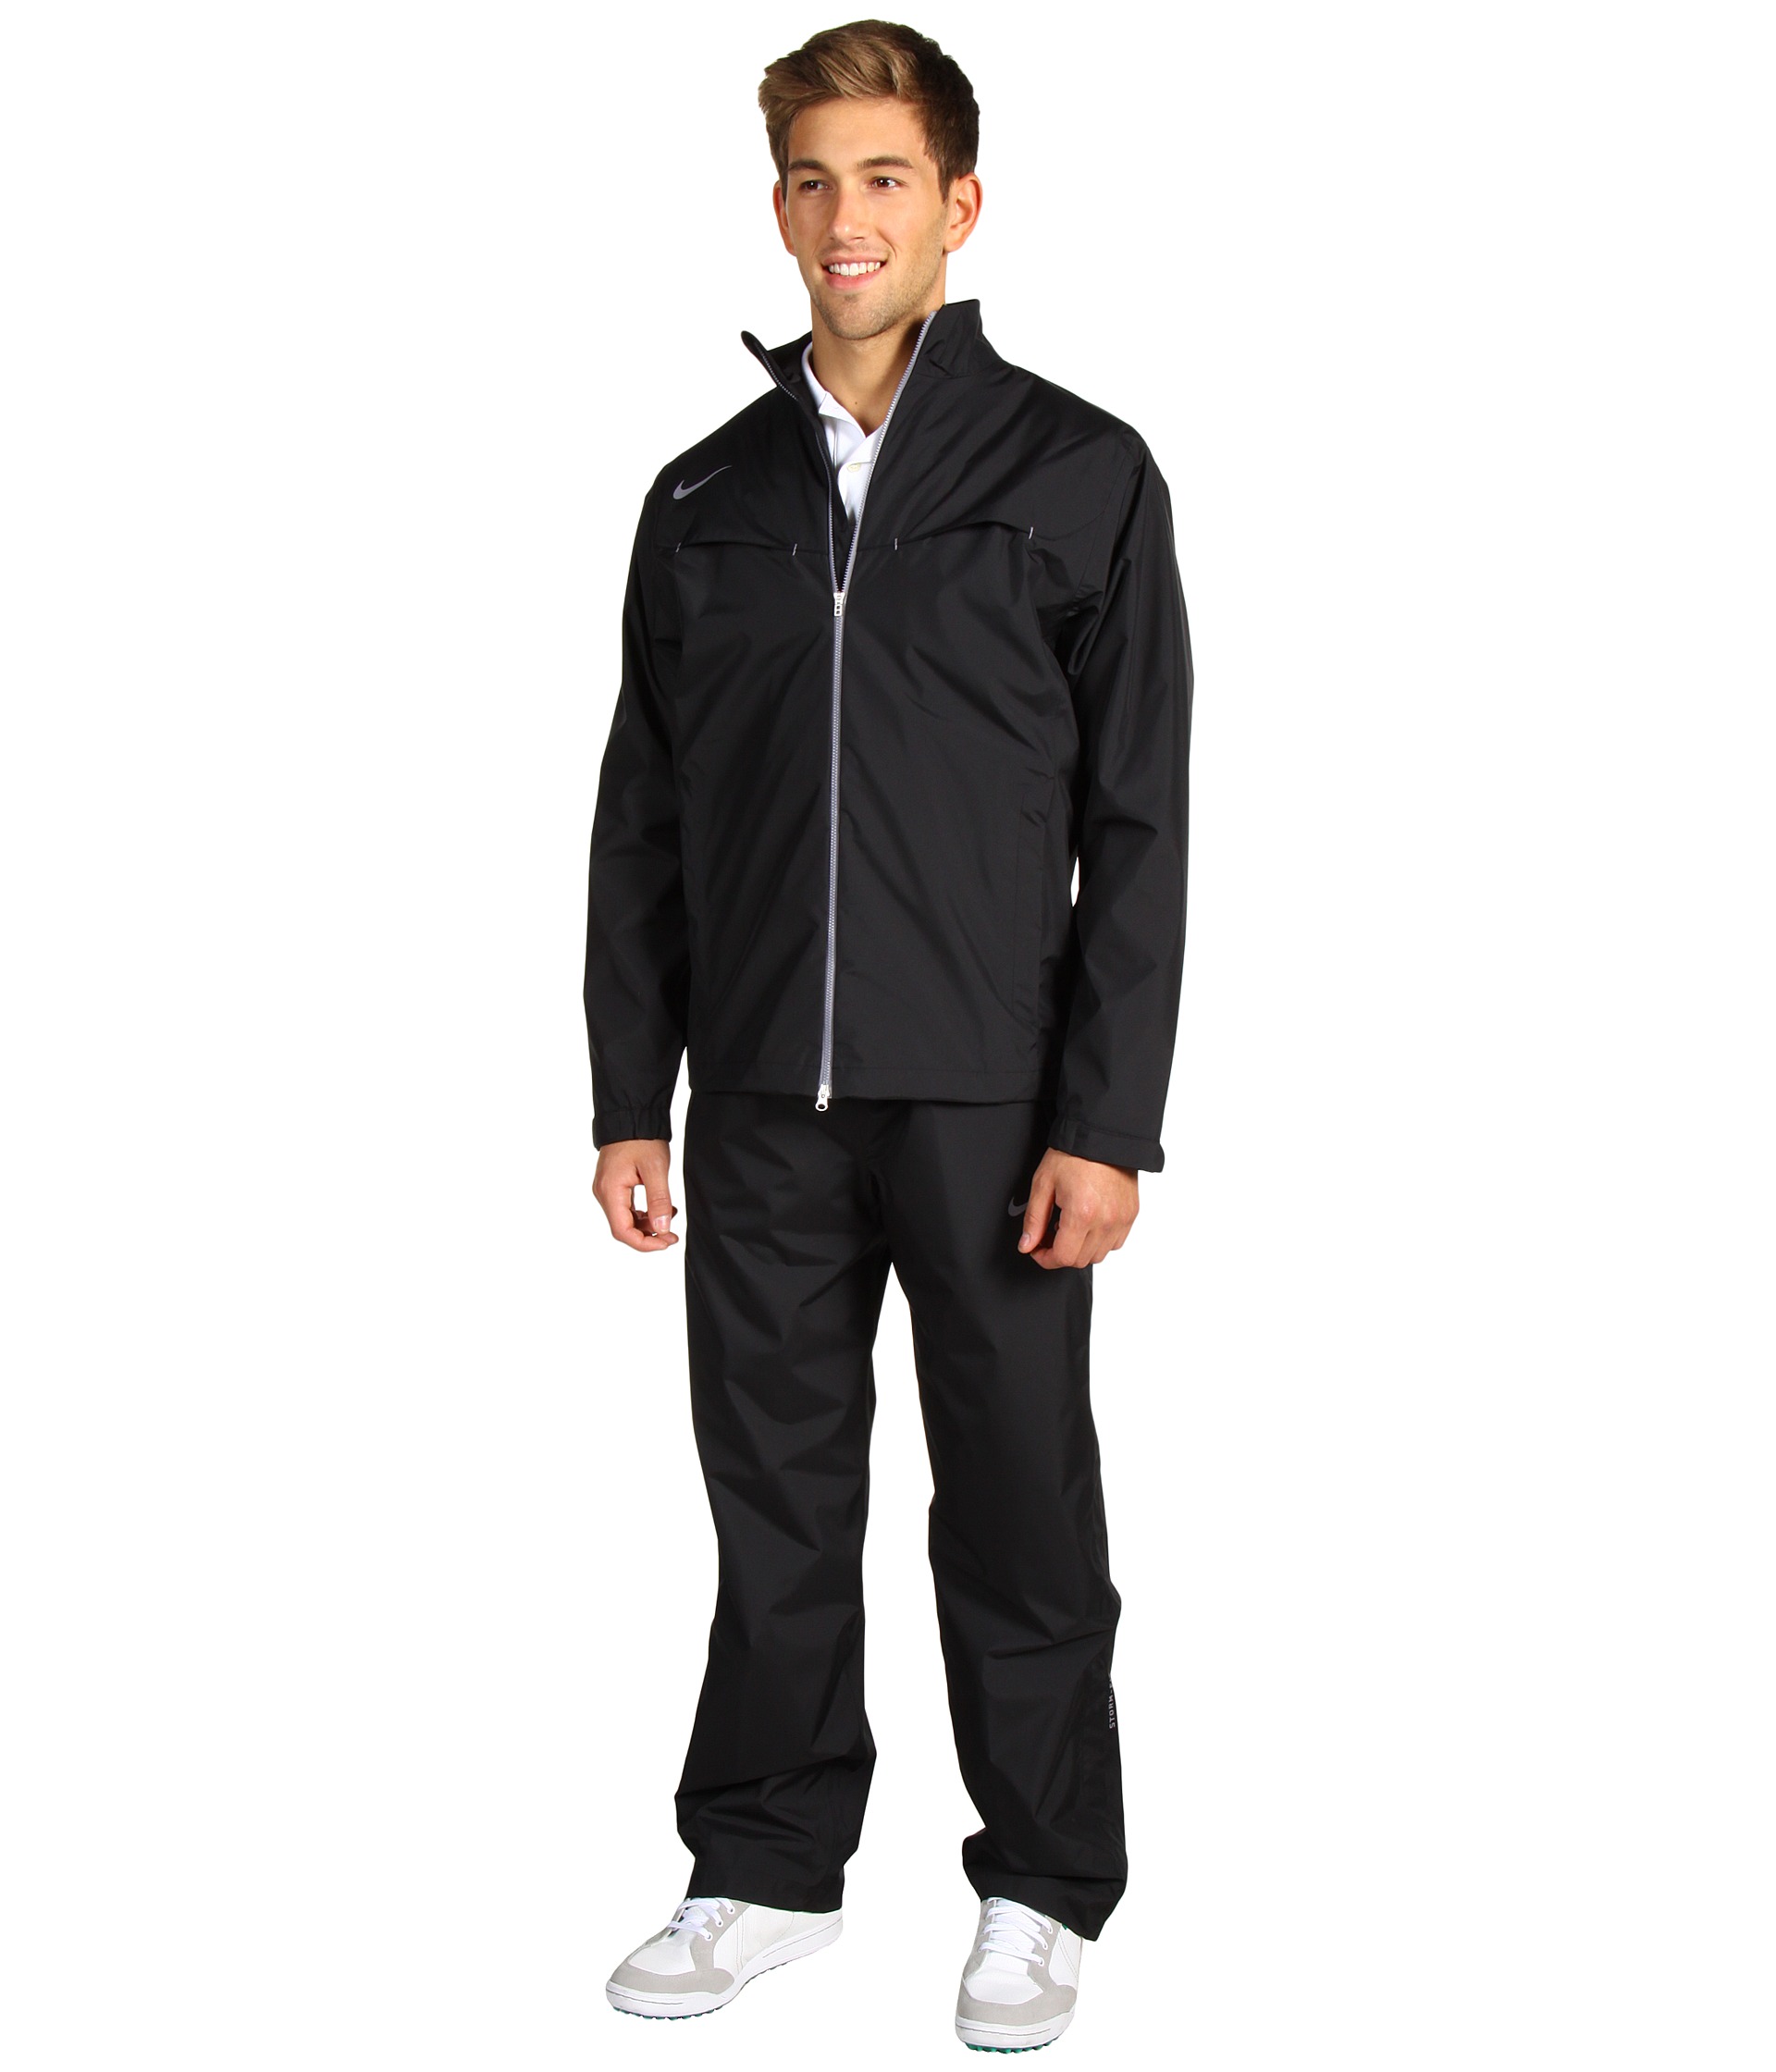 Nike Golf Storm Fit Rain Suit | Shipped Free at Zappos